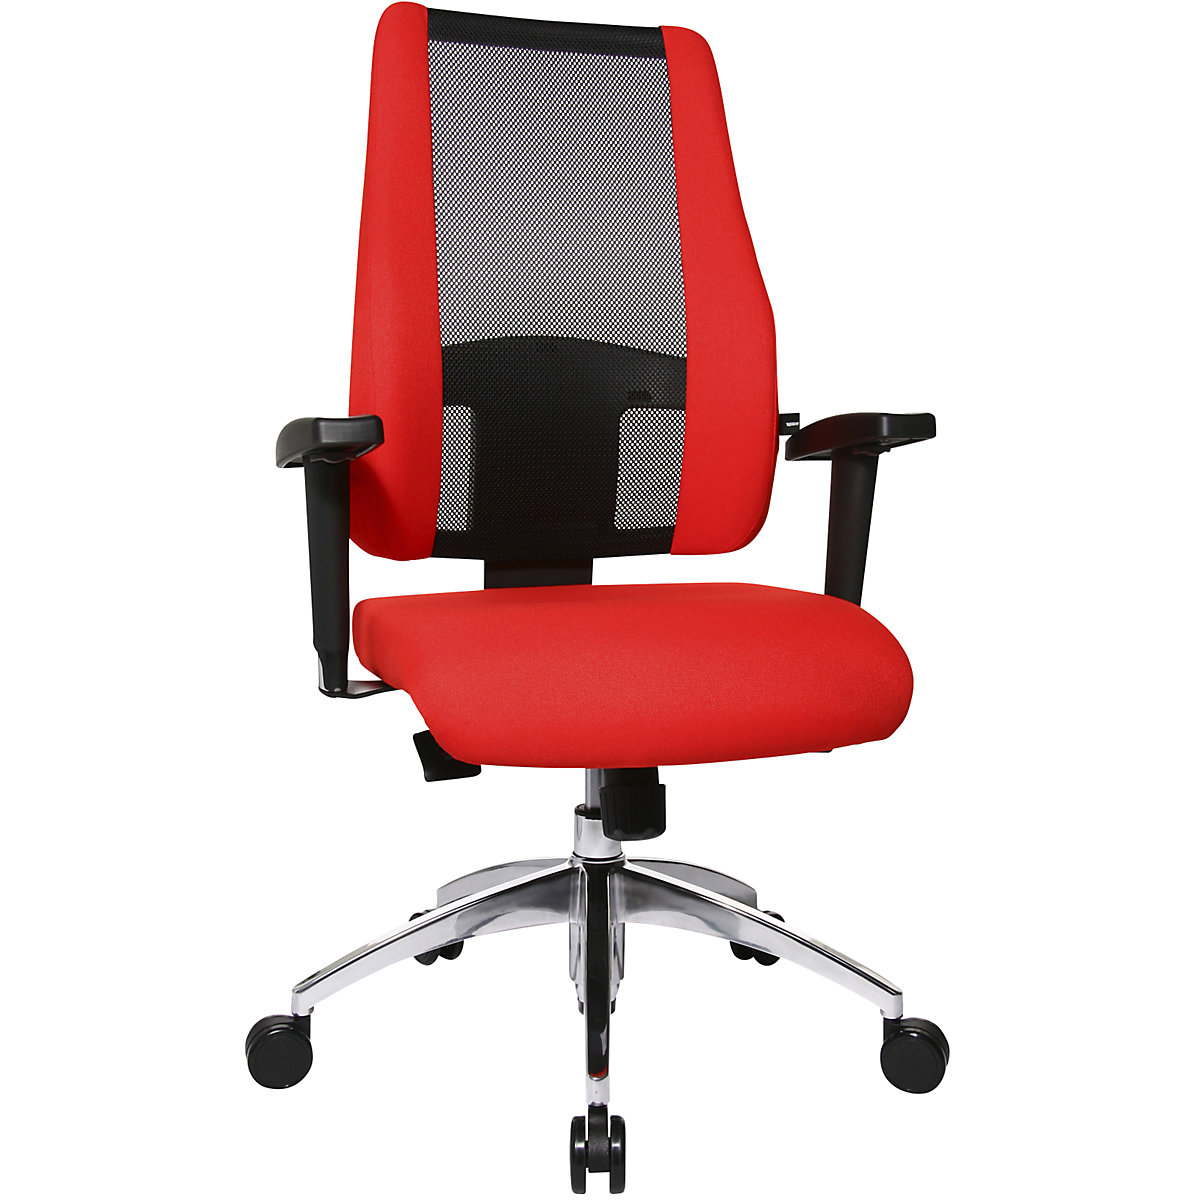 AIR SYNCRO office swivel chair – Topstar, mesh back rest with padded side parts, black / red-7